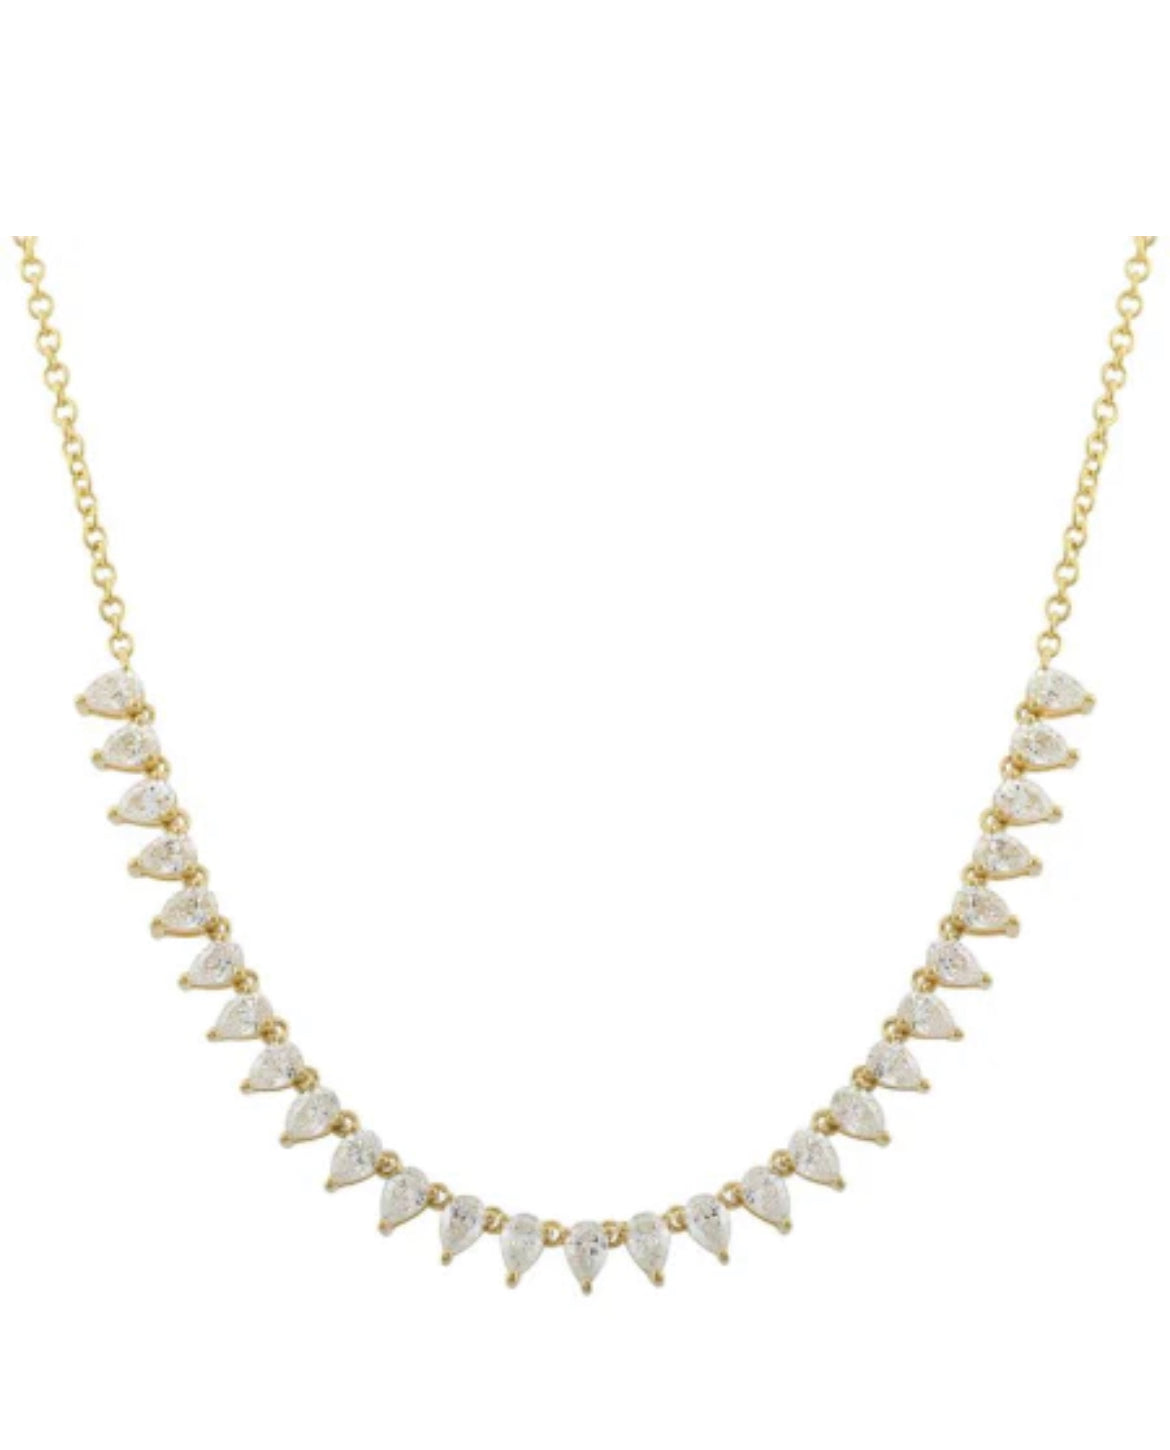 3 Prong Pear Shaped Diamond Necklace